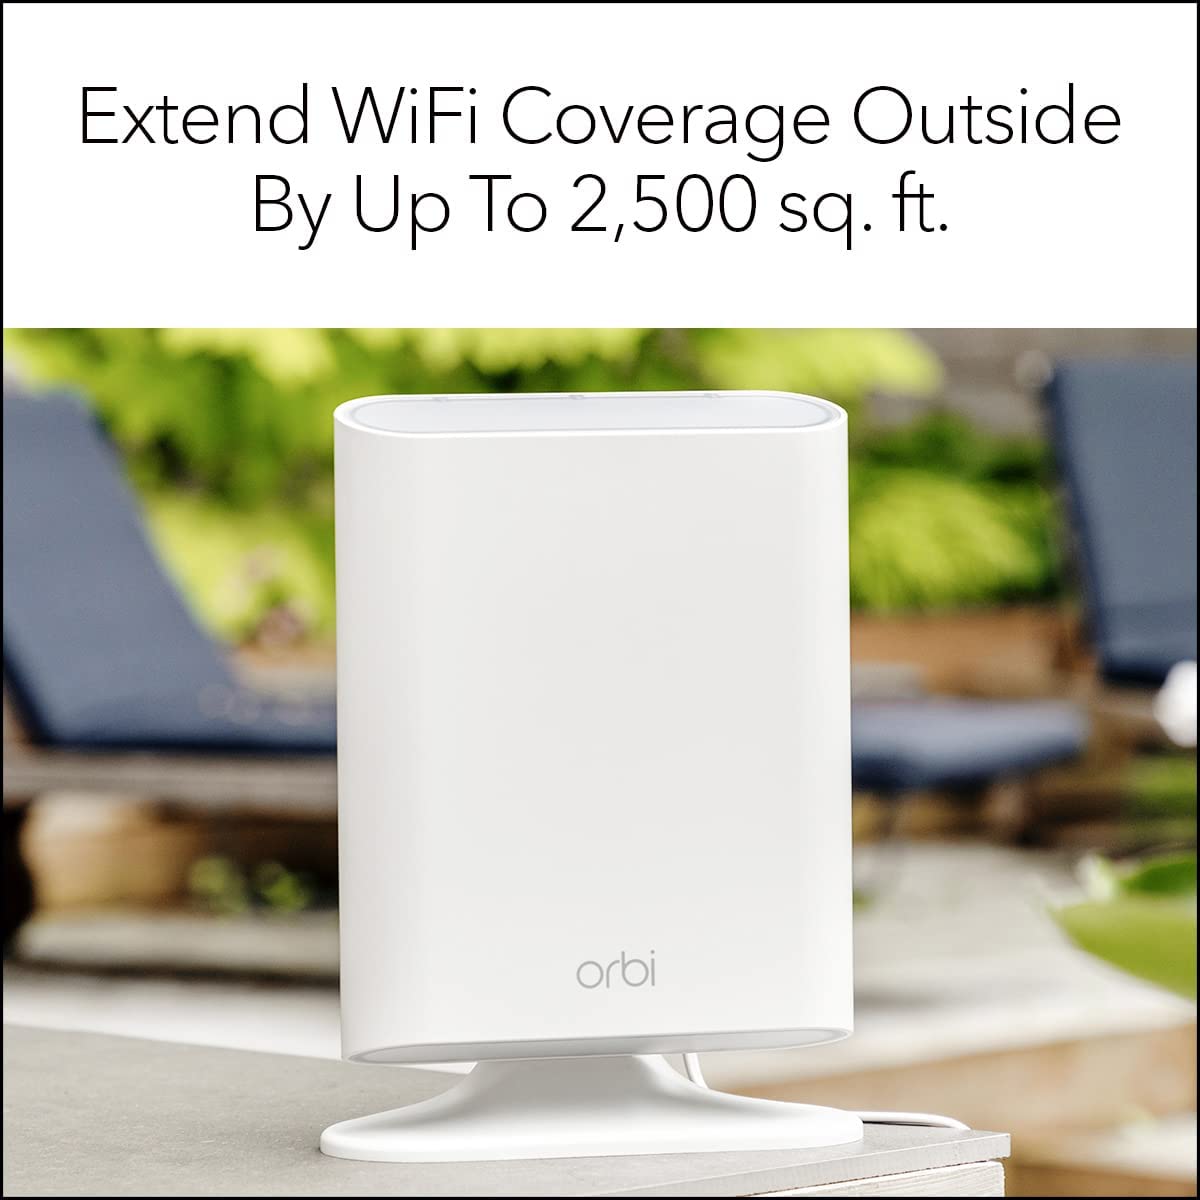 NETGEAR Orbi Outdoor Tri-Band Mesh Satellite WiFi Extender (RBS50Y), Works Best with Orbi RBK50 WiFi Mesh Systems, Adds up to 2,500 sq. ft. Coverage